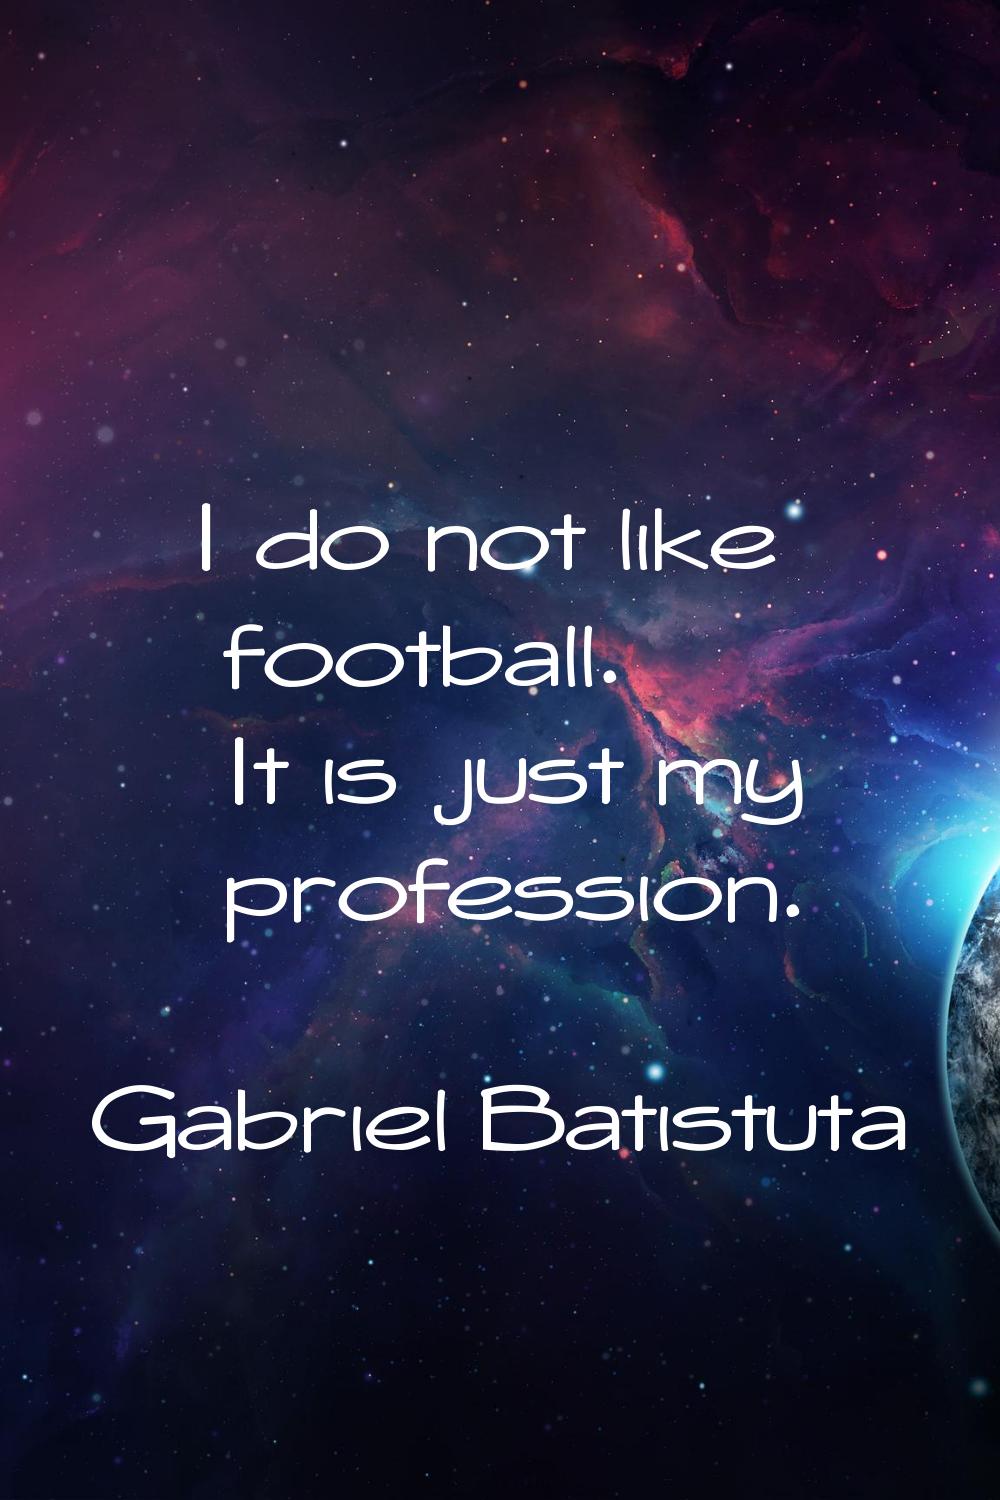 I do not like football. It is just my profession.